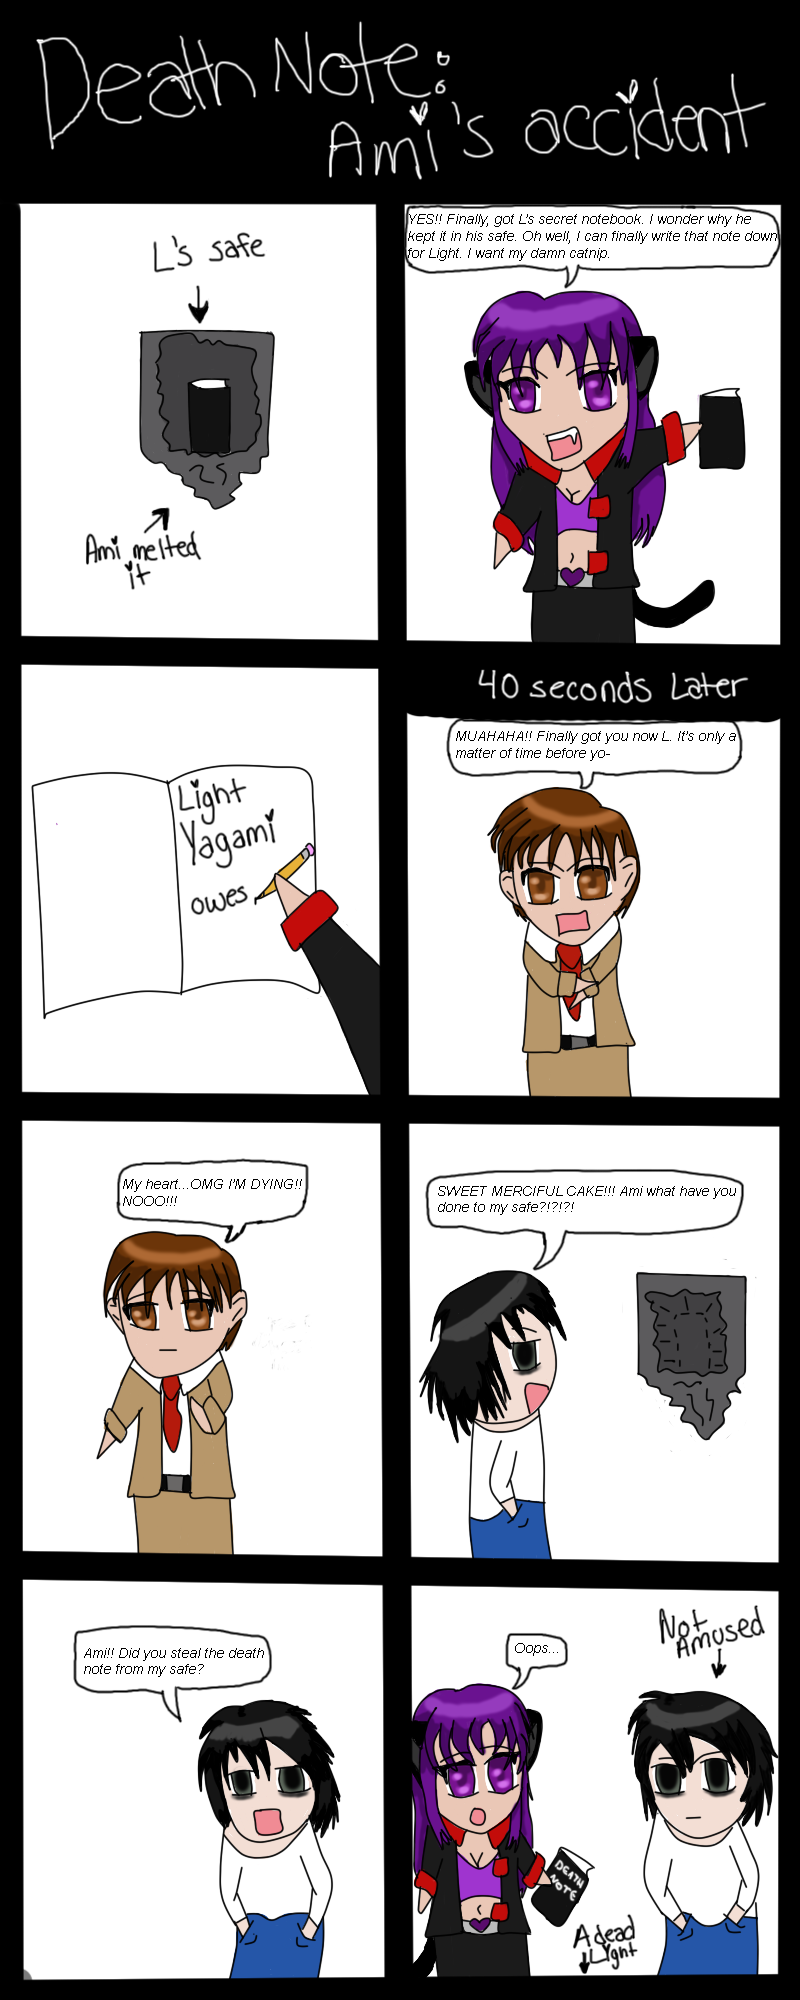 Death Note: Ami's Accident